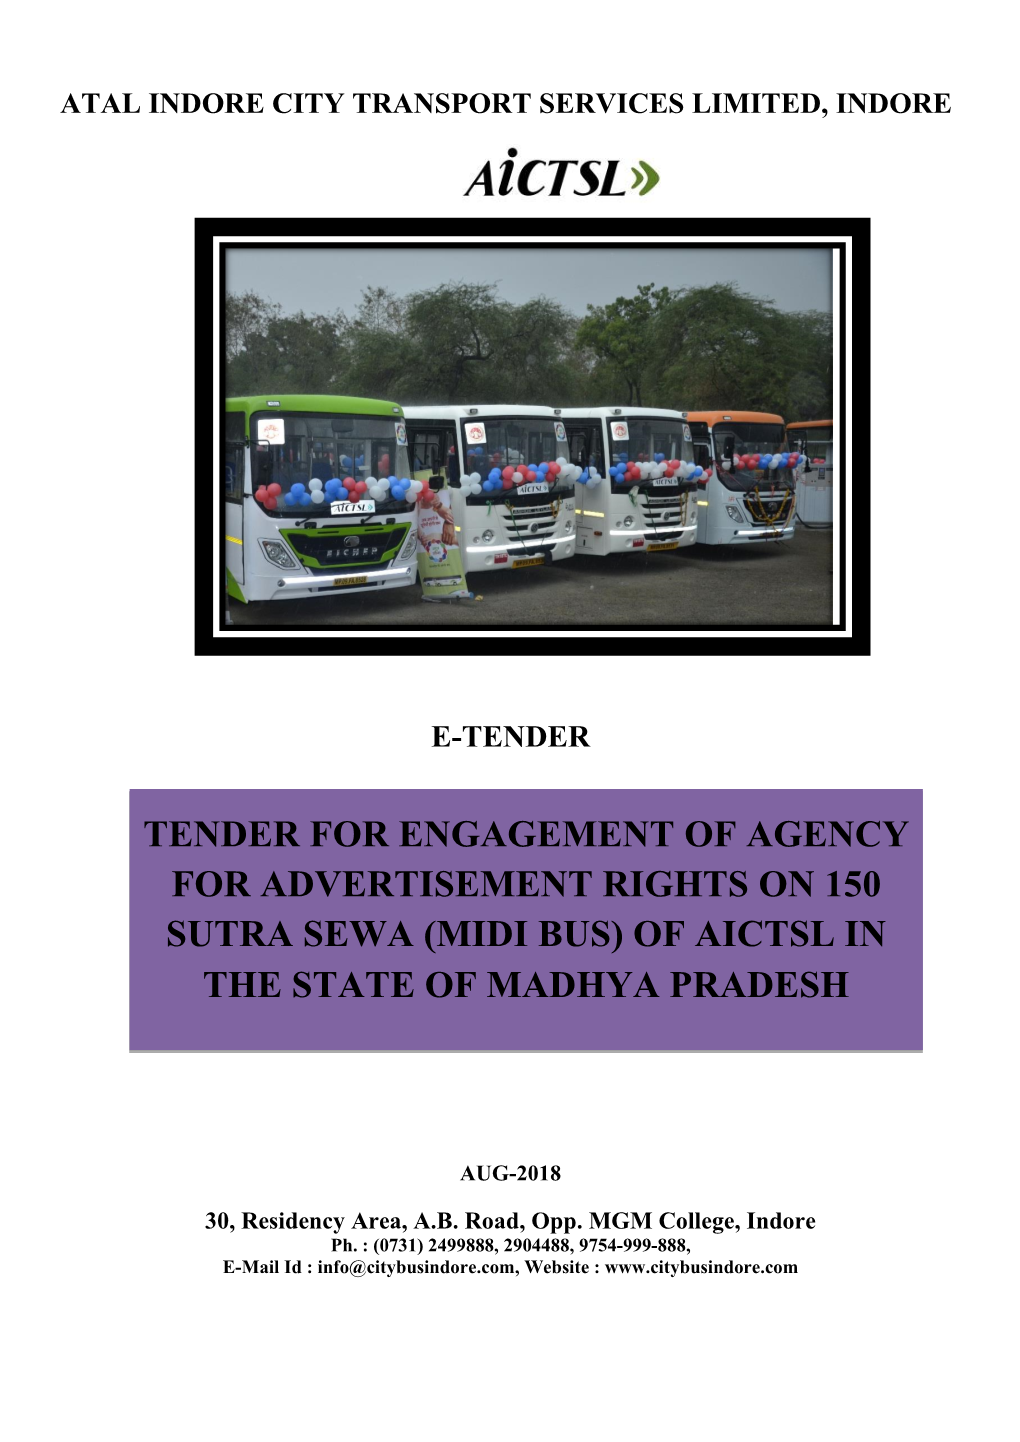 Tender for Engagement of Agency for Advertisement Rights on 150 Sutra Sewa (Midi Bus) of Aictsl In